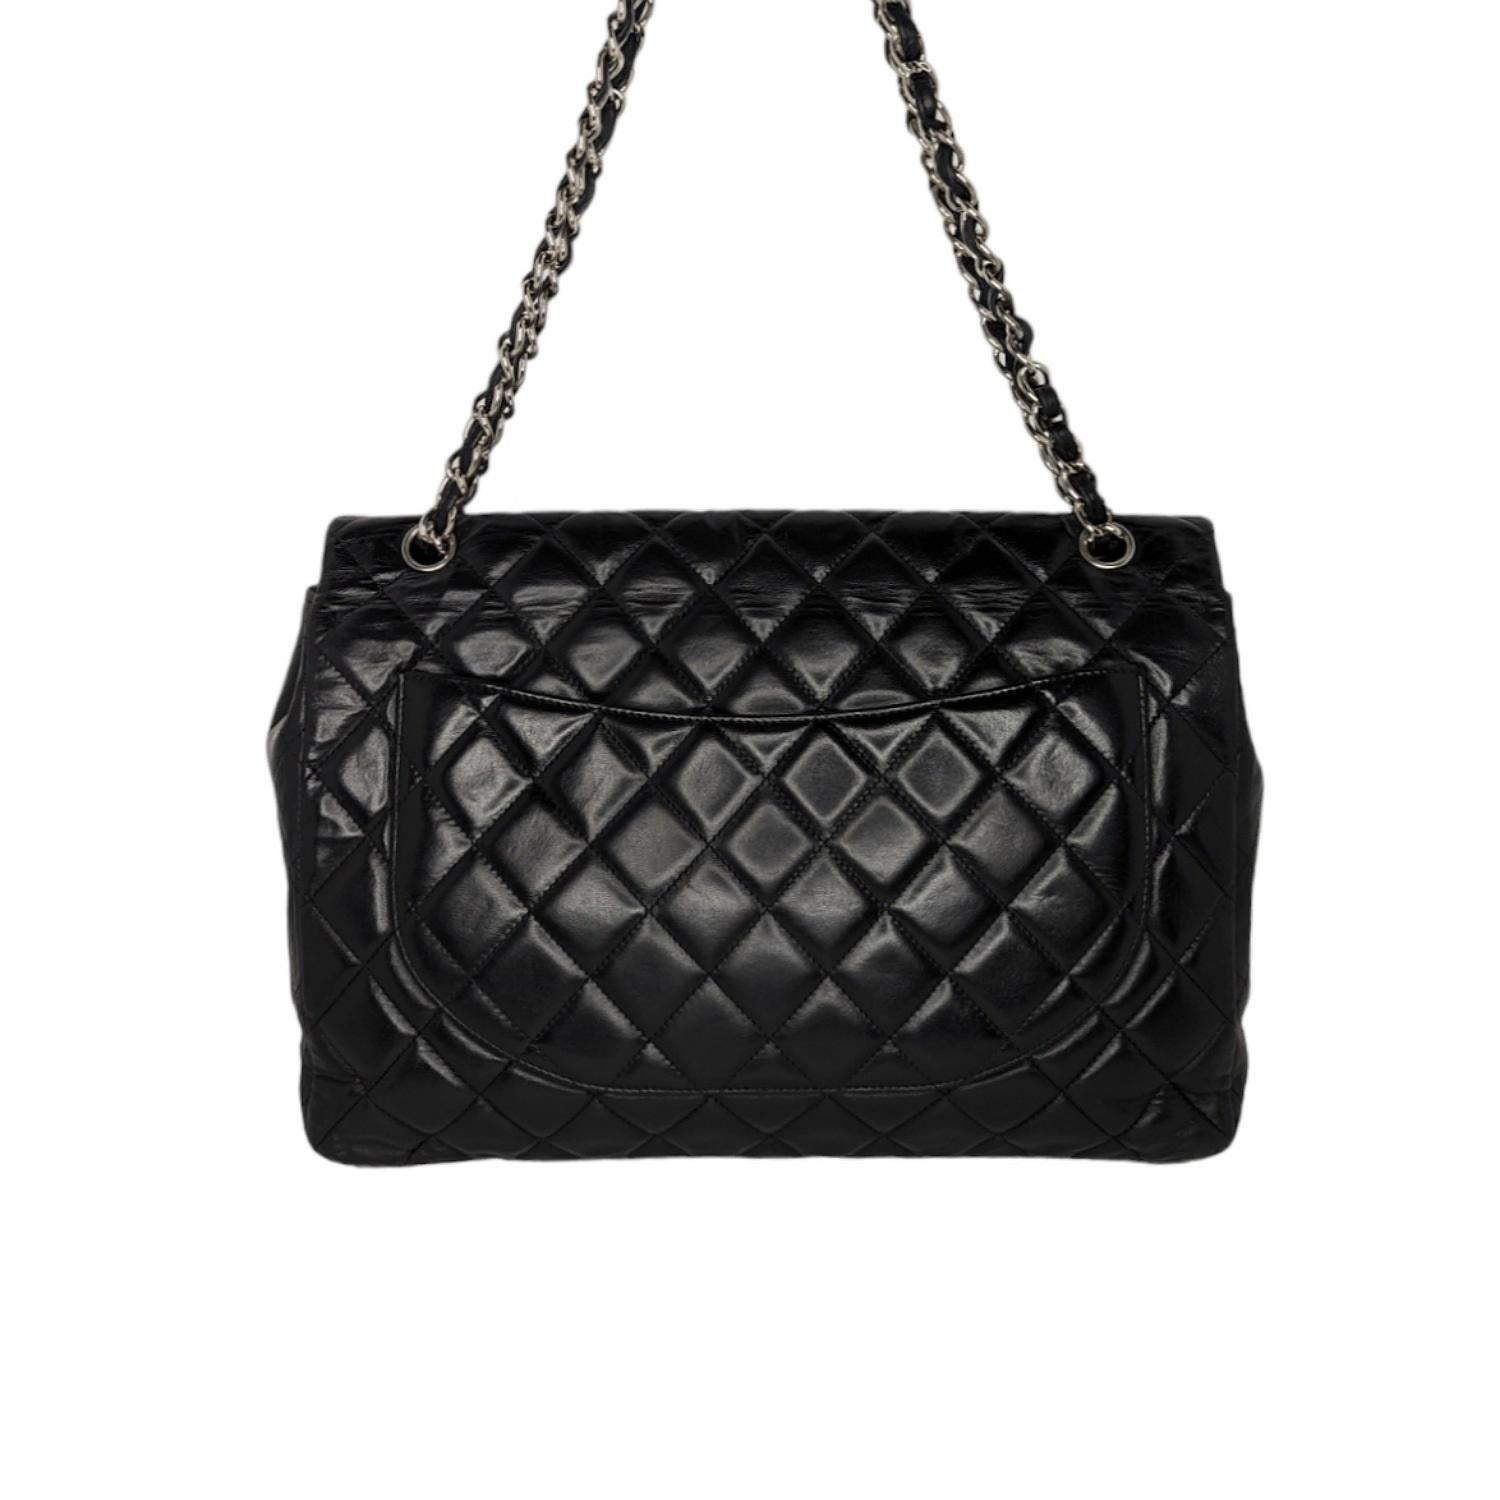 This stylish shoulder bag is crafted of soft and smooth diamond quilted lambskin leather in black. The bag features silver chain link shoulder straps threaded with leather and a facing flap with a silver Chanel CC turn lock. The shoulder bag opens